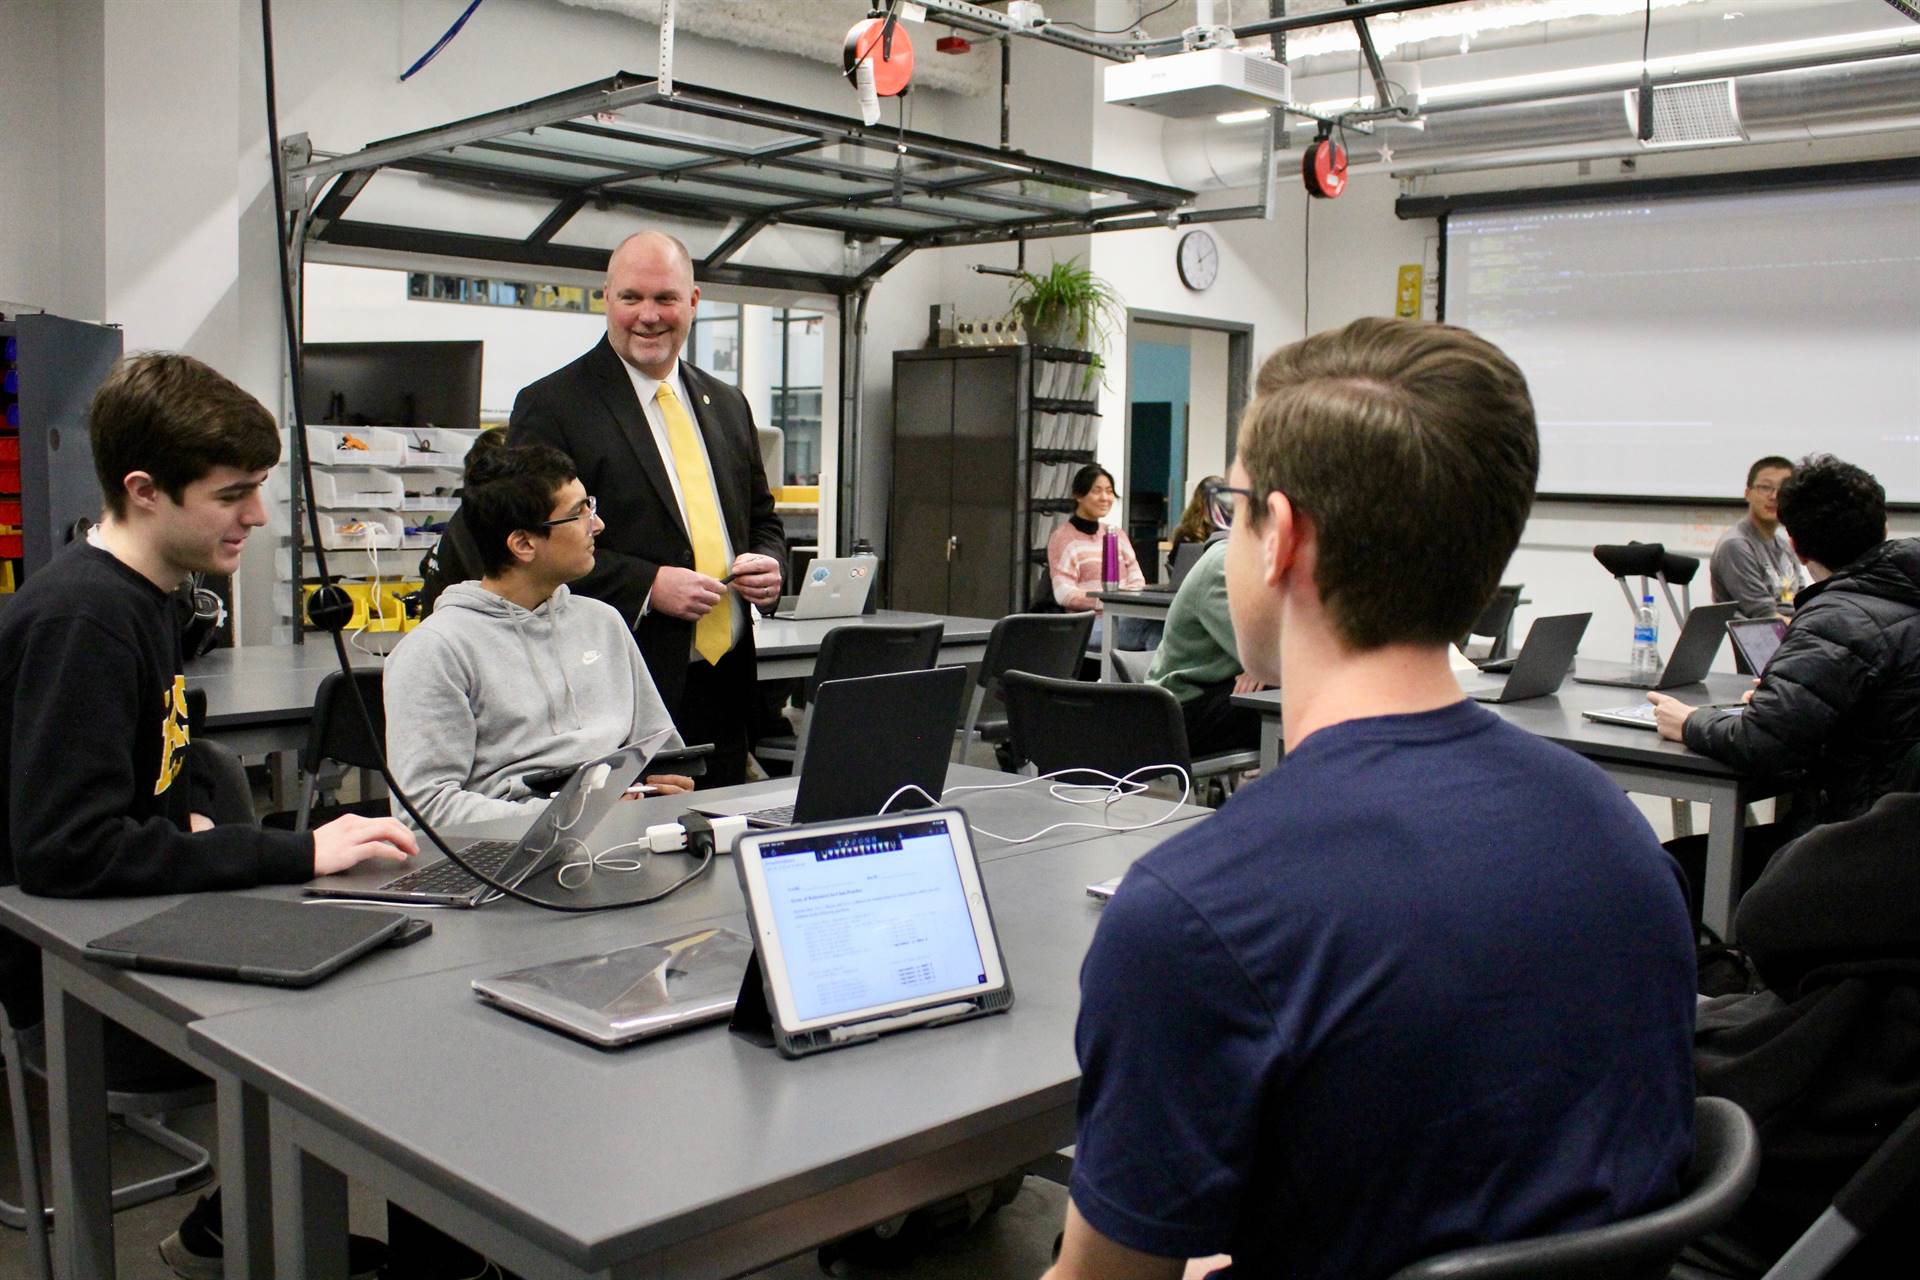 Dr. Robert Hunt (standing) interacting with three students sitting at a table in a computer science 